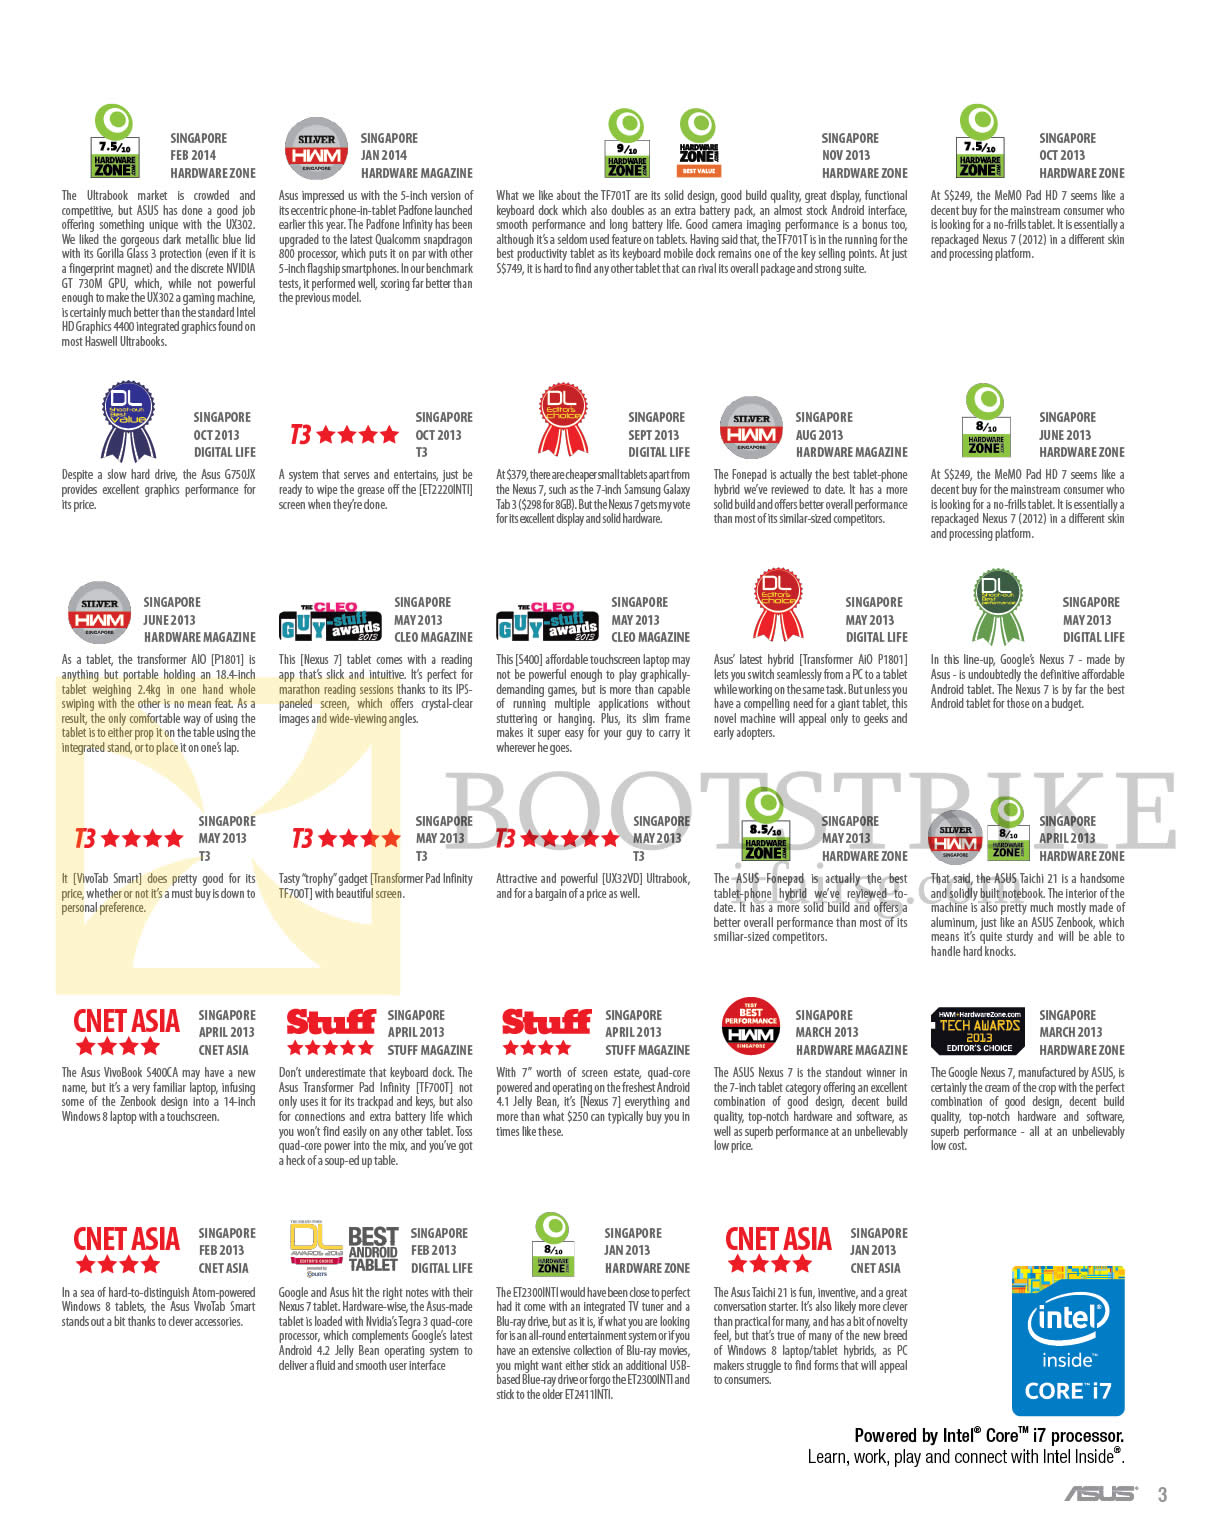 IT SHOW 2015 price list image brochure of ASUS 2014 Awards 2